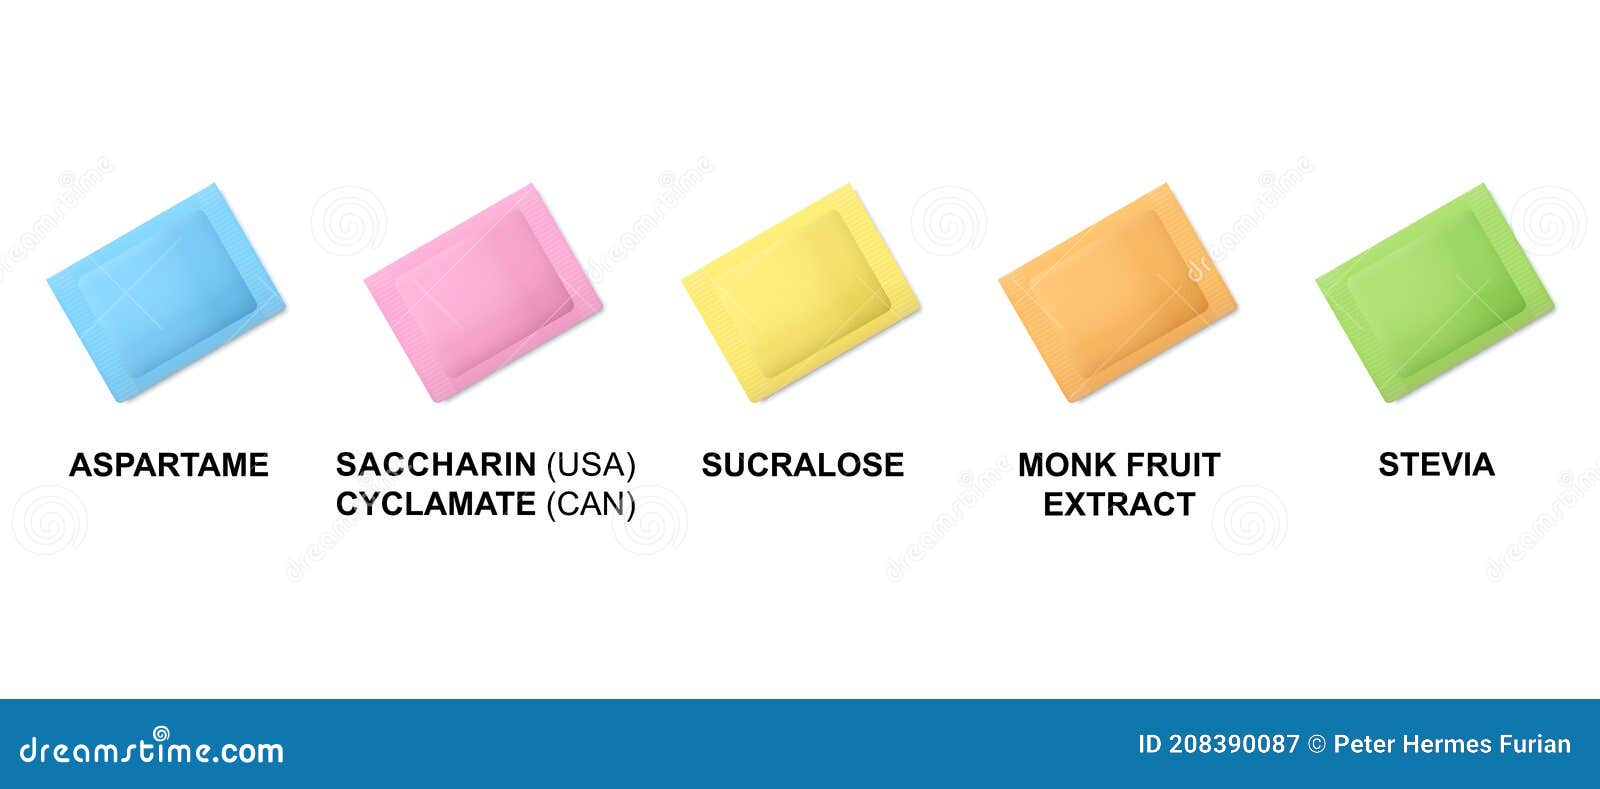 sweetener packets, color definition, color codes of sugar substitute pouches